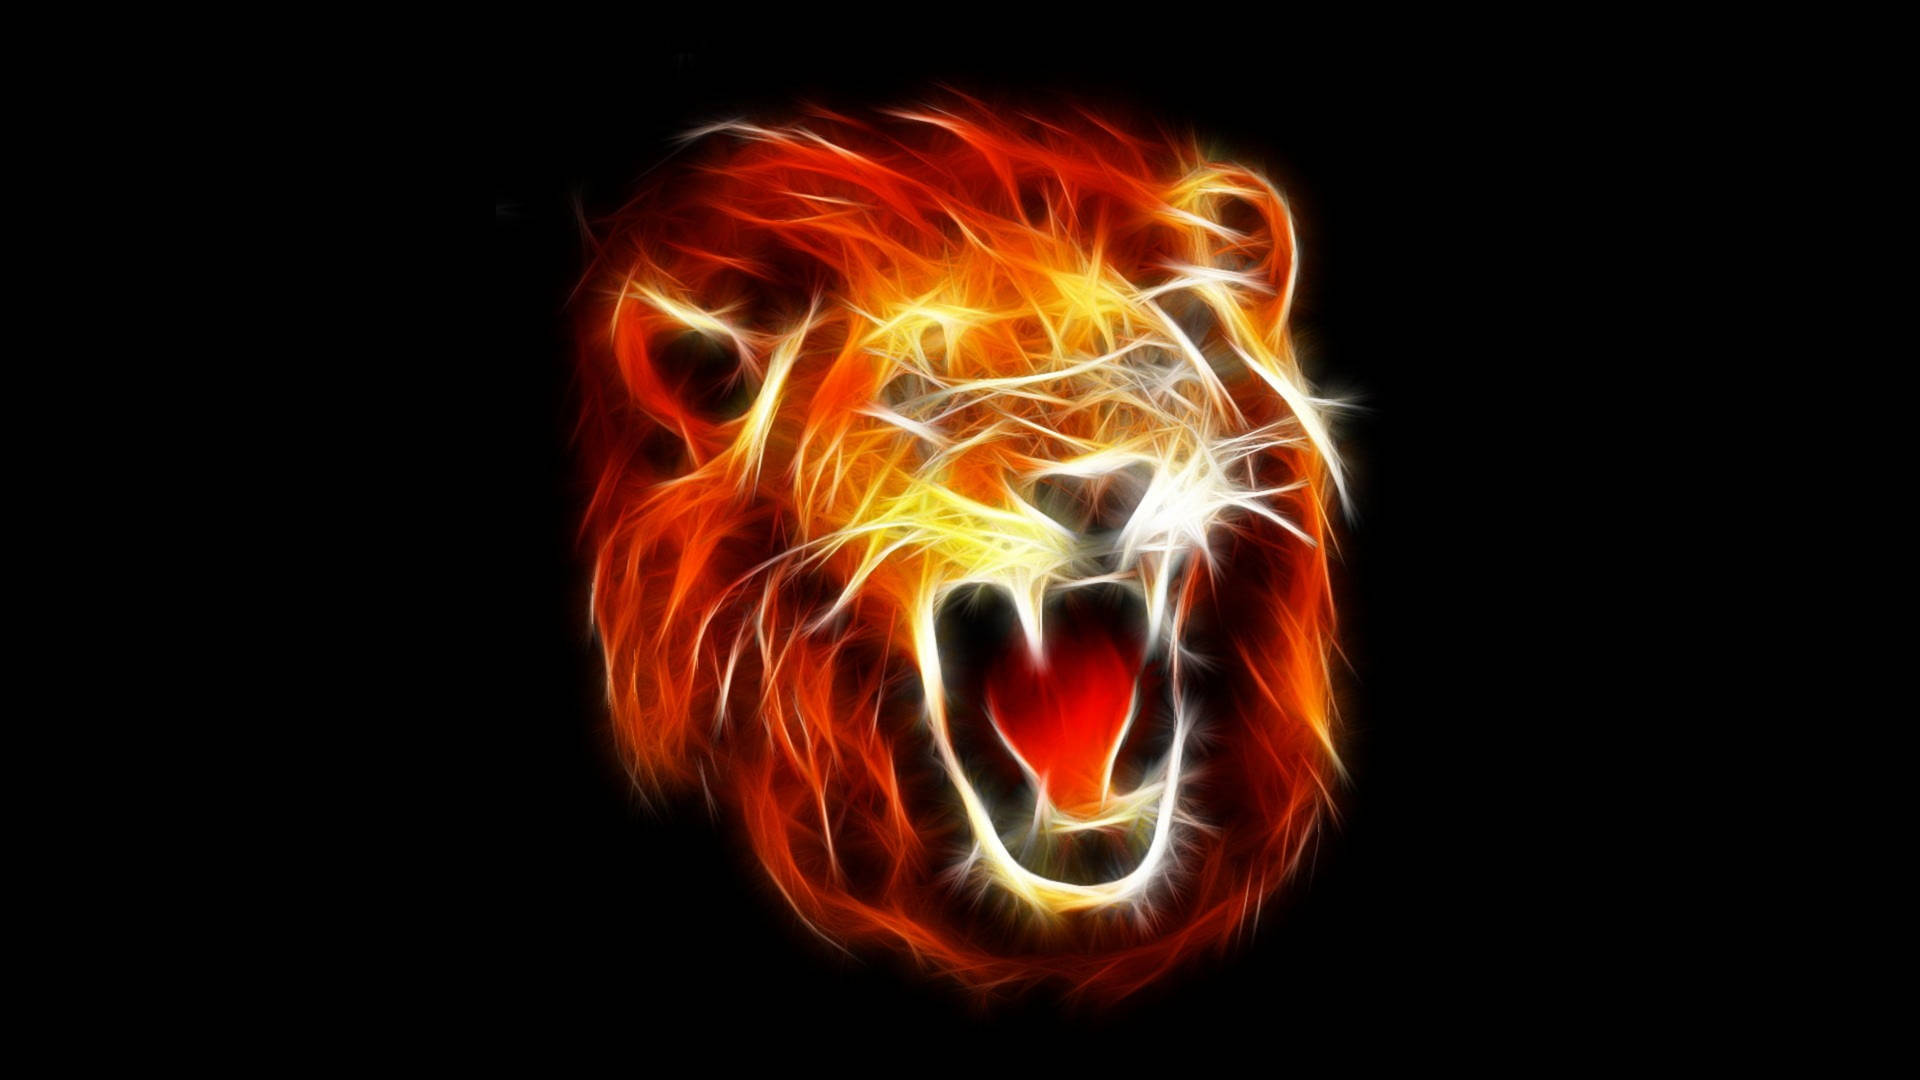 Glowing Angry Lion Art Wallpaper